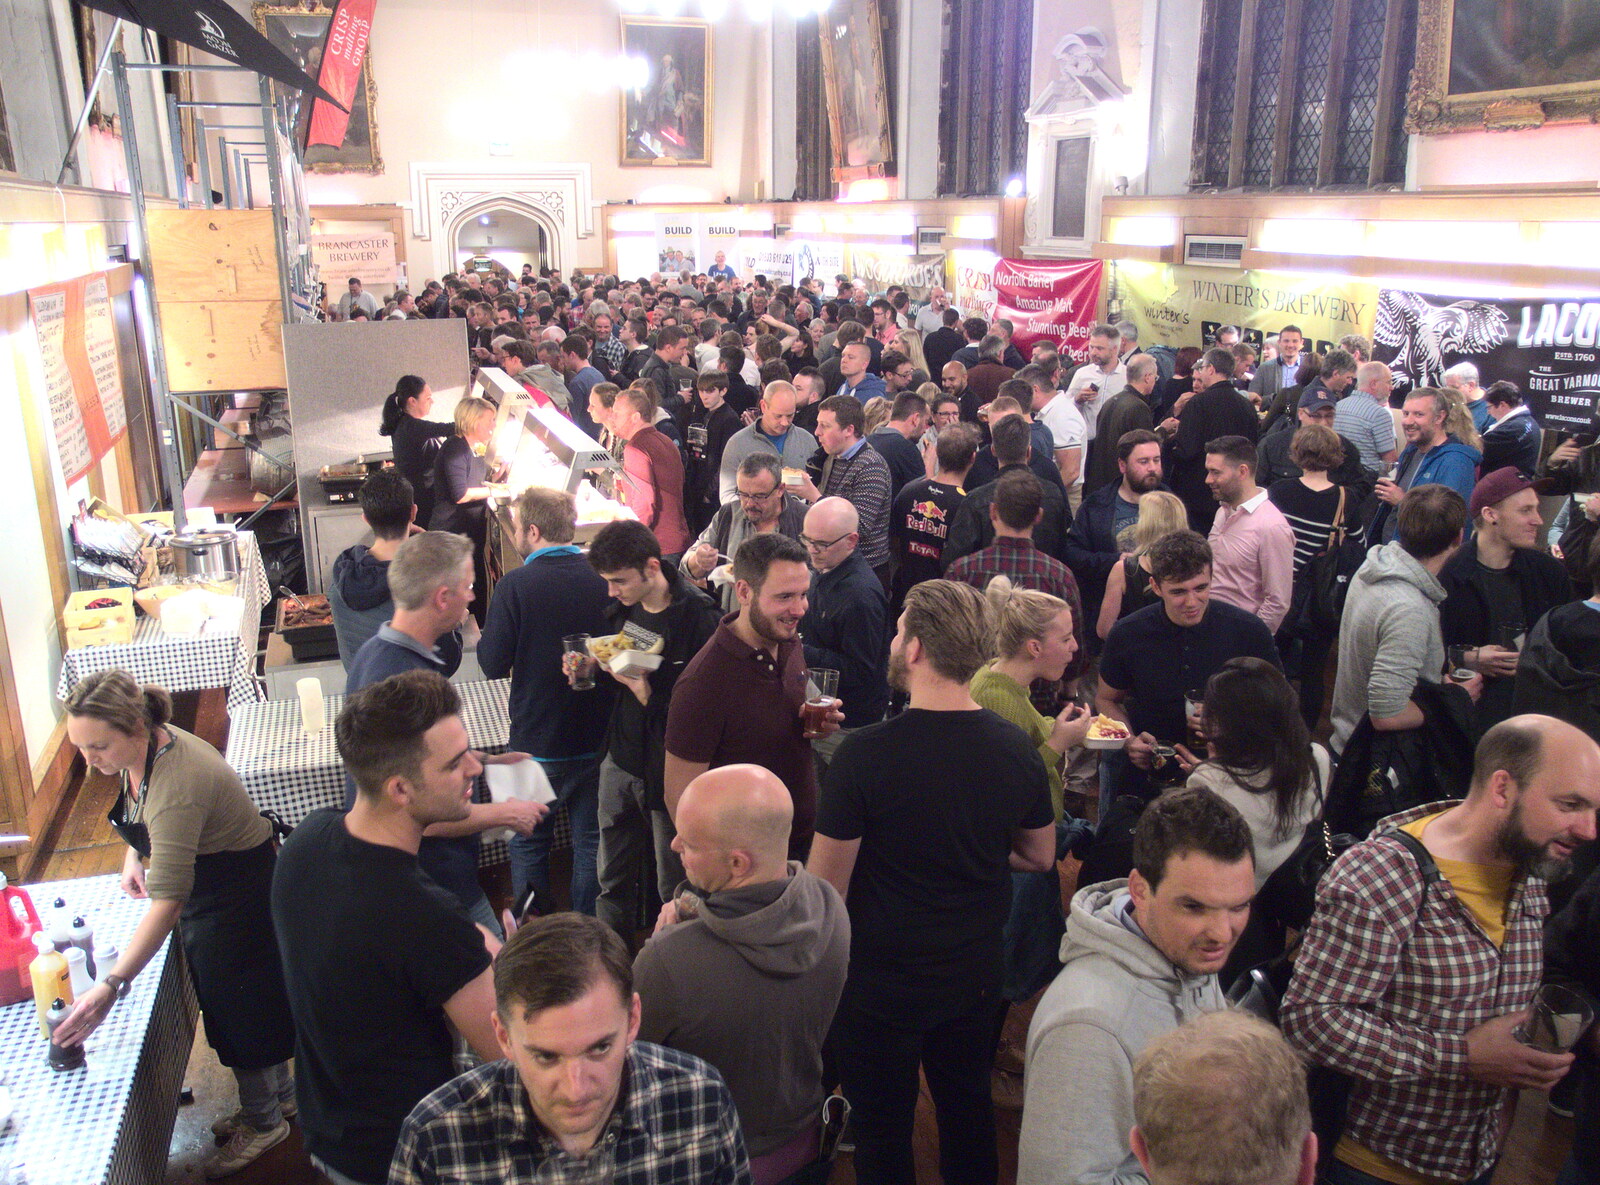 The crowds in Blackfriar's Hall from The Norwich Beer Festival, St. Andrew's Hall, Norwich, Norfolk - 26th October 2016